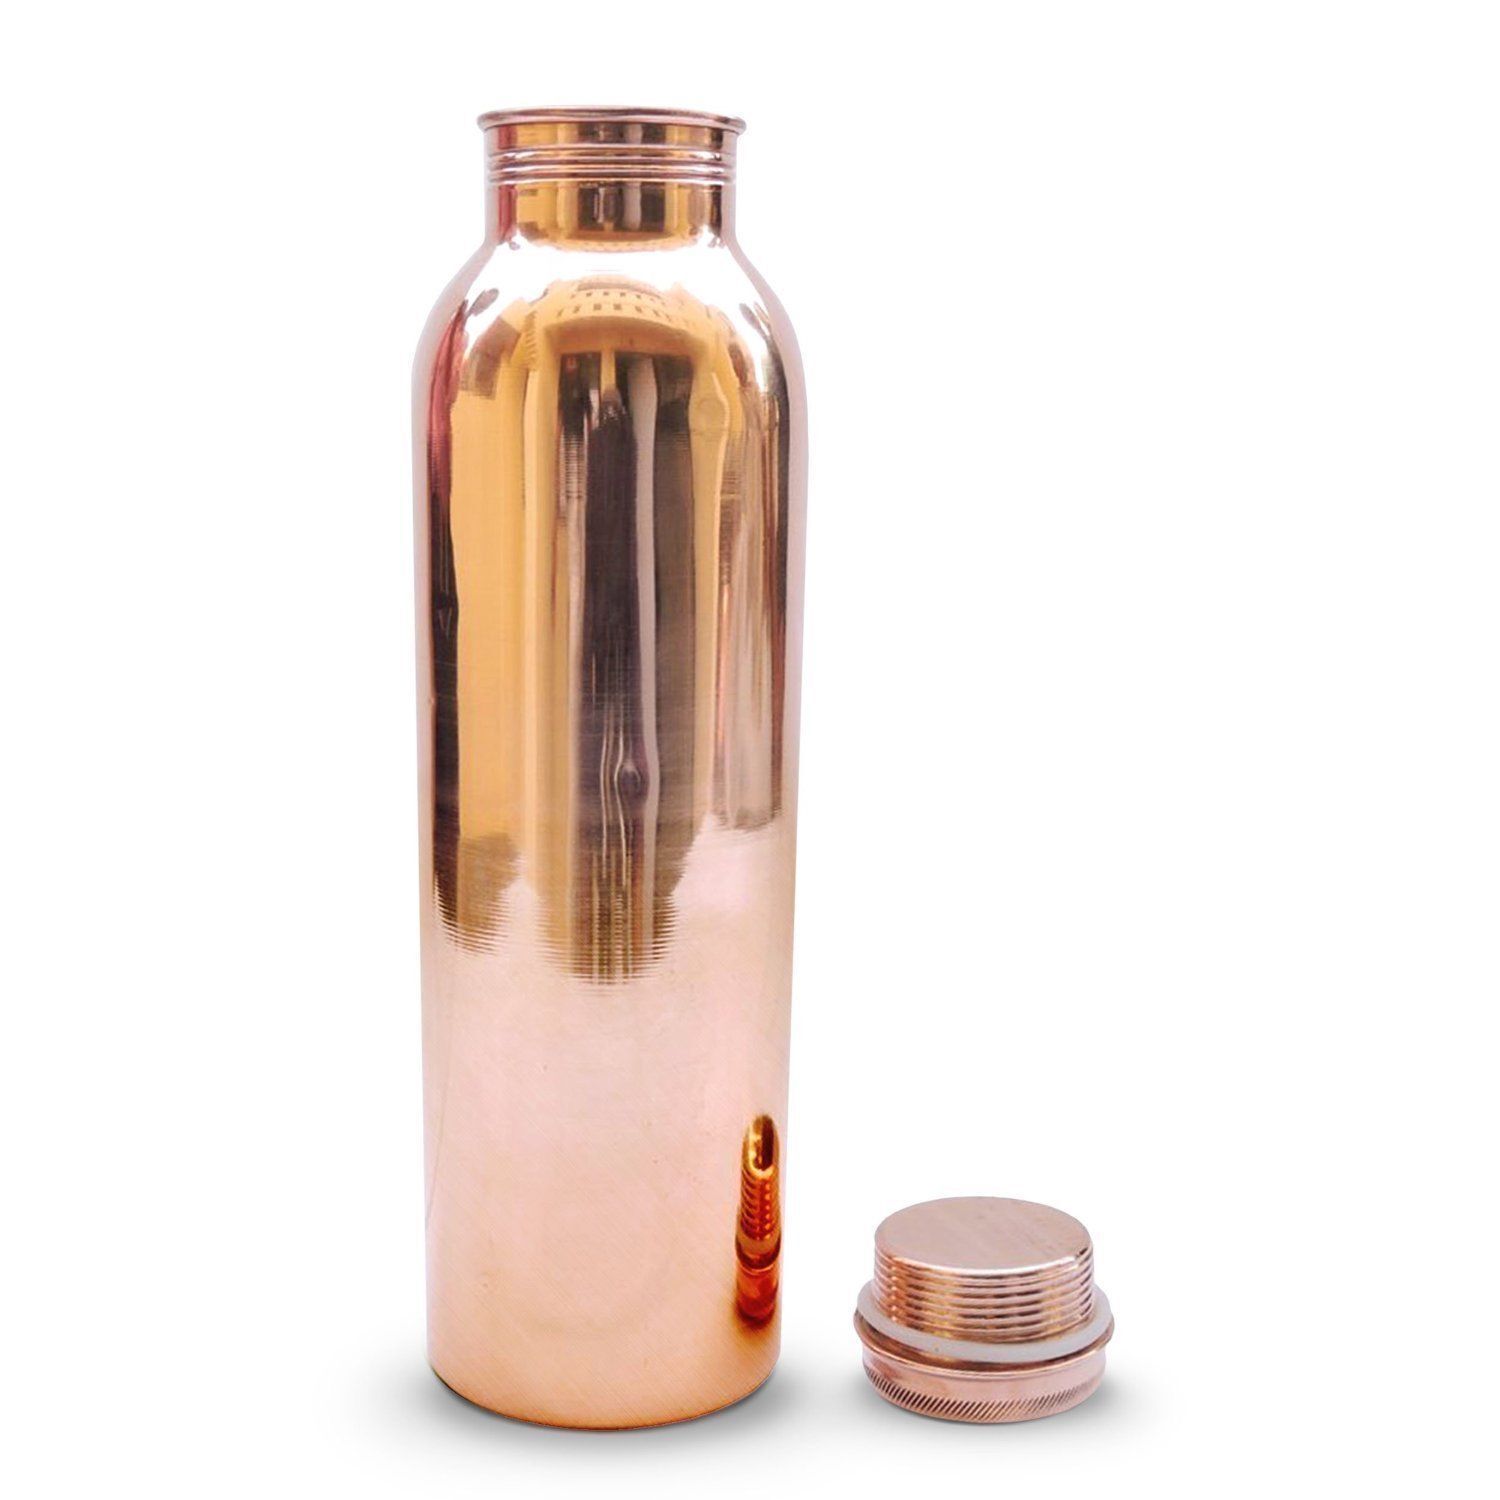 100% Pure Copper Water Bottle For Yoga Ayurveda Health Benefits 950 ml